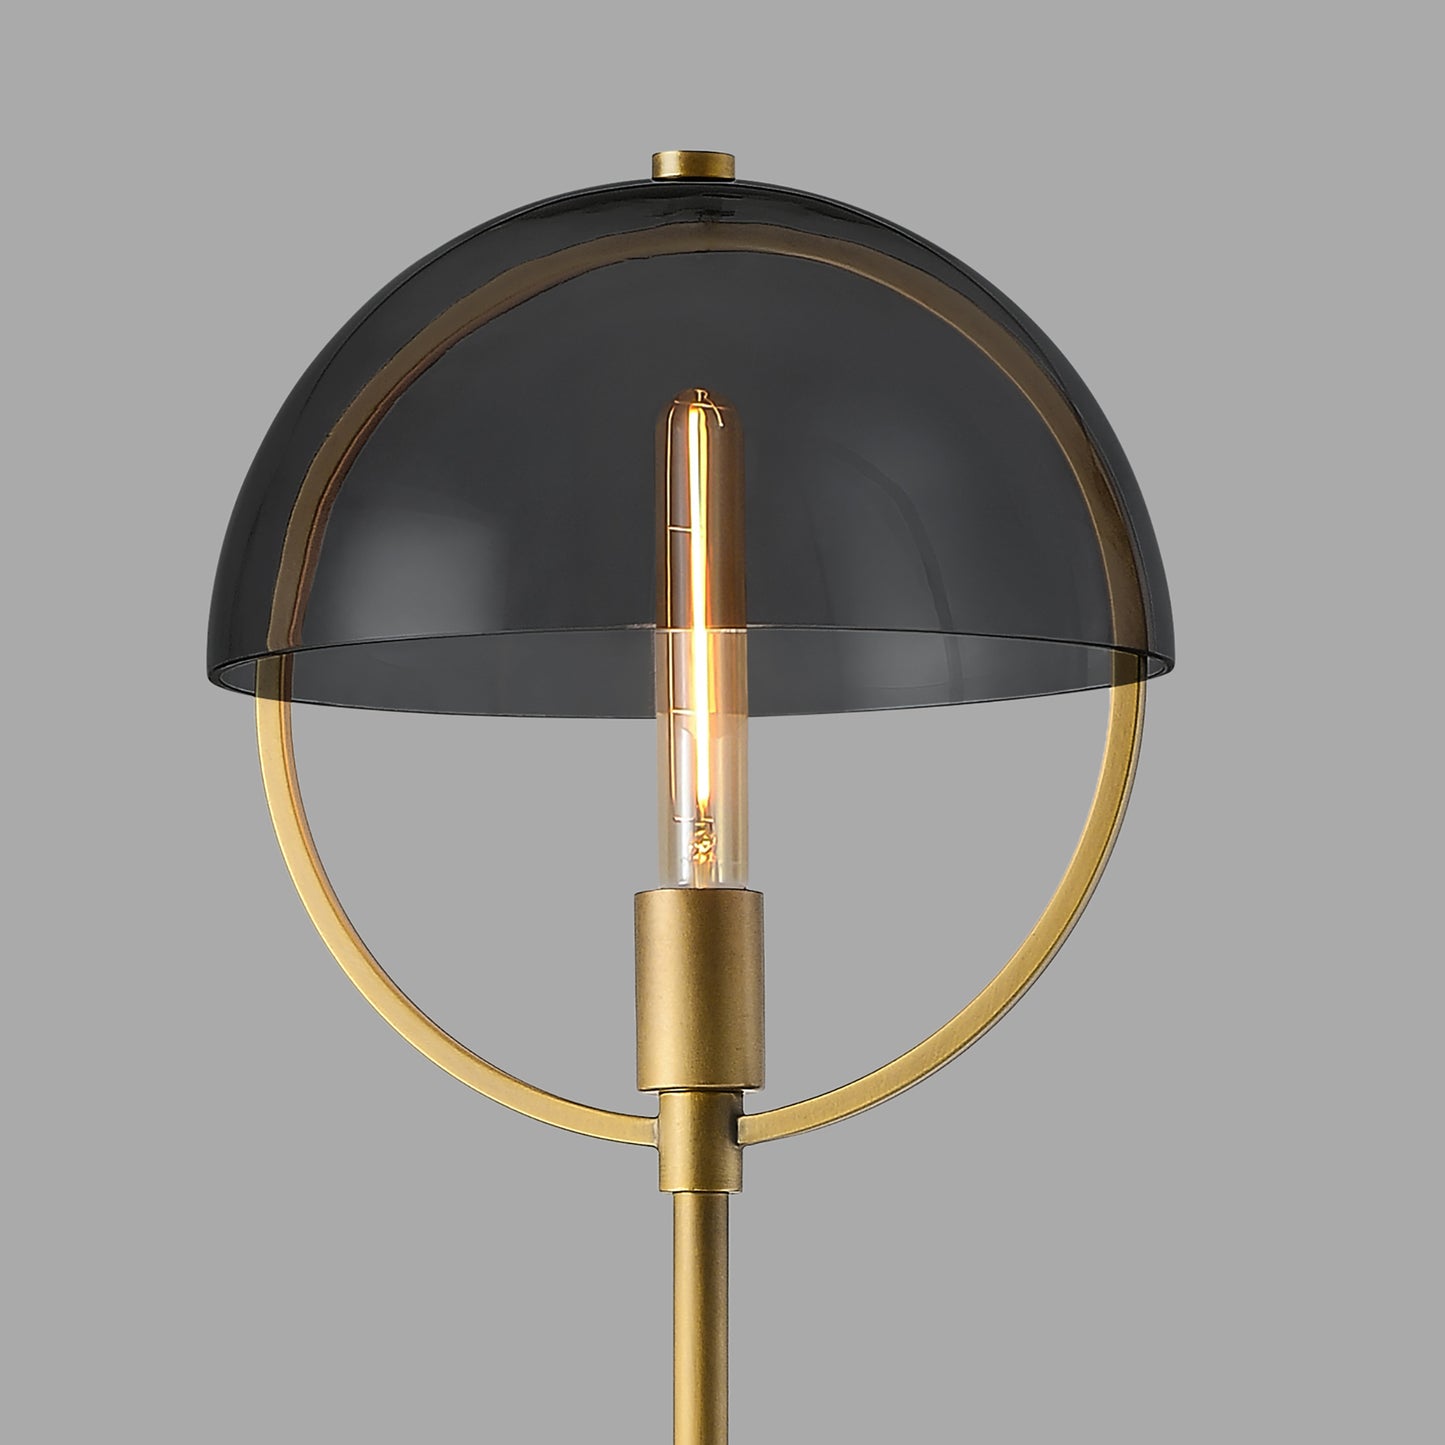 Copernica Floor Lamp features the T9 Emberline LED Light Bulb. The tube LED bulb is at the center of the universe in this unique mid century modern light fixture.